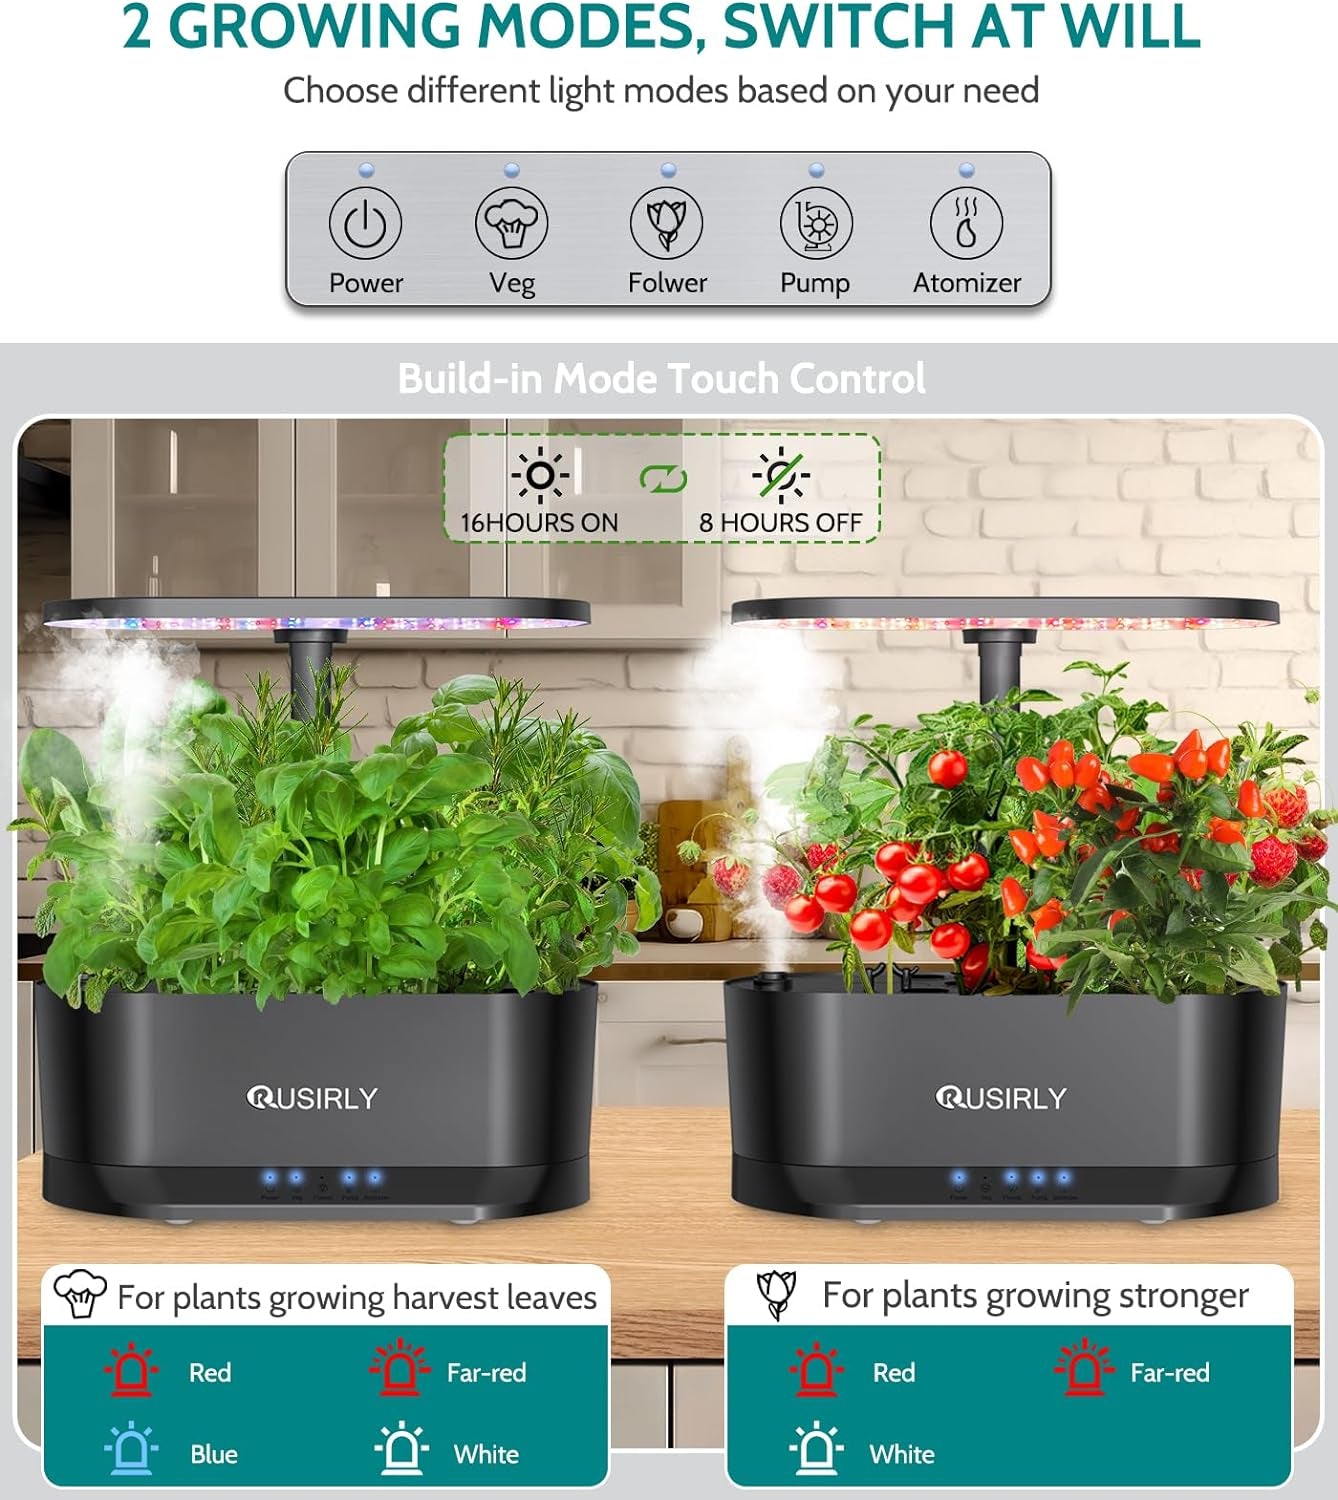 Hydroponics Growing System Indoor Garden: 2024 New Upgrade 11Pods Planting Herb Garden Kit with Atomizer & Water Automatic Cycle System, Ideal Christmas Gifts for Mom Dad Men Women